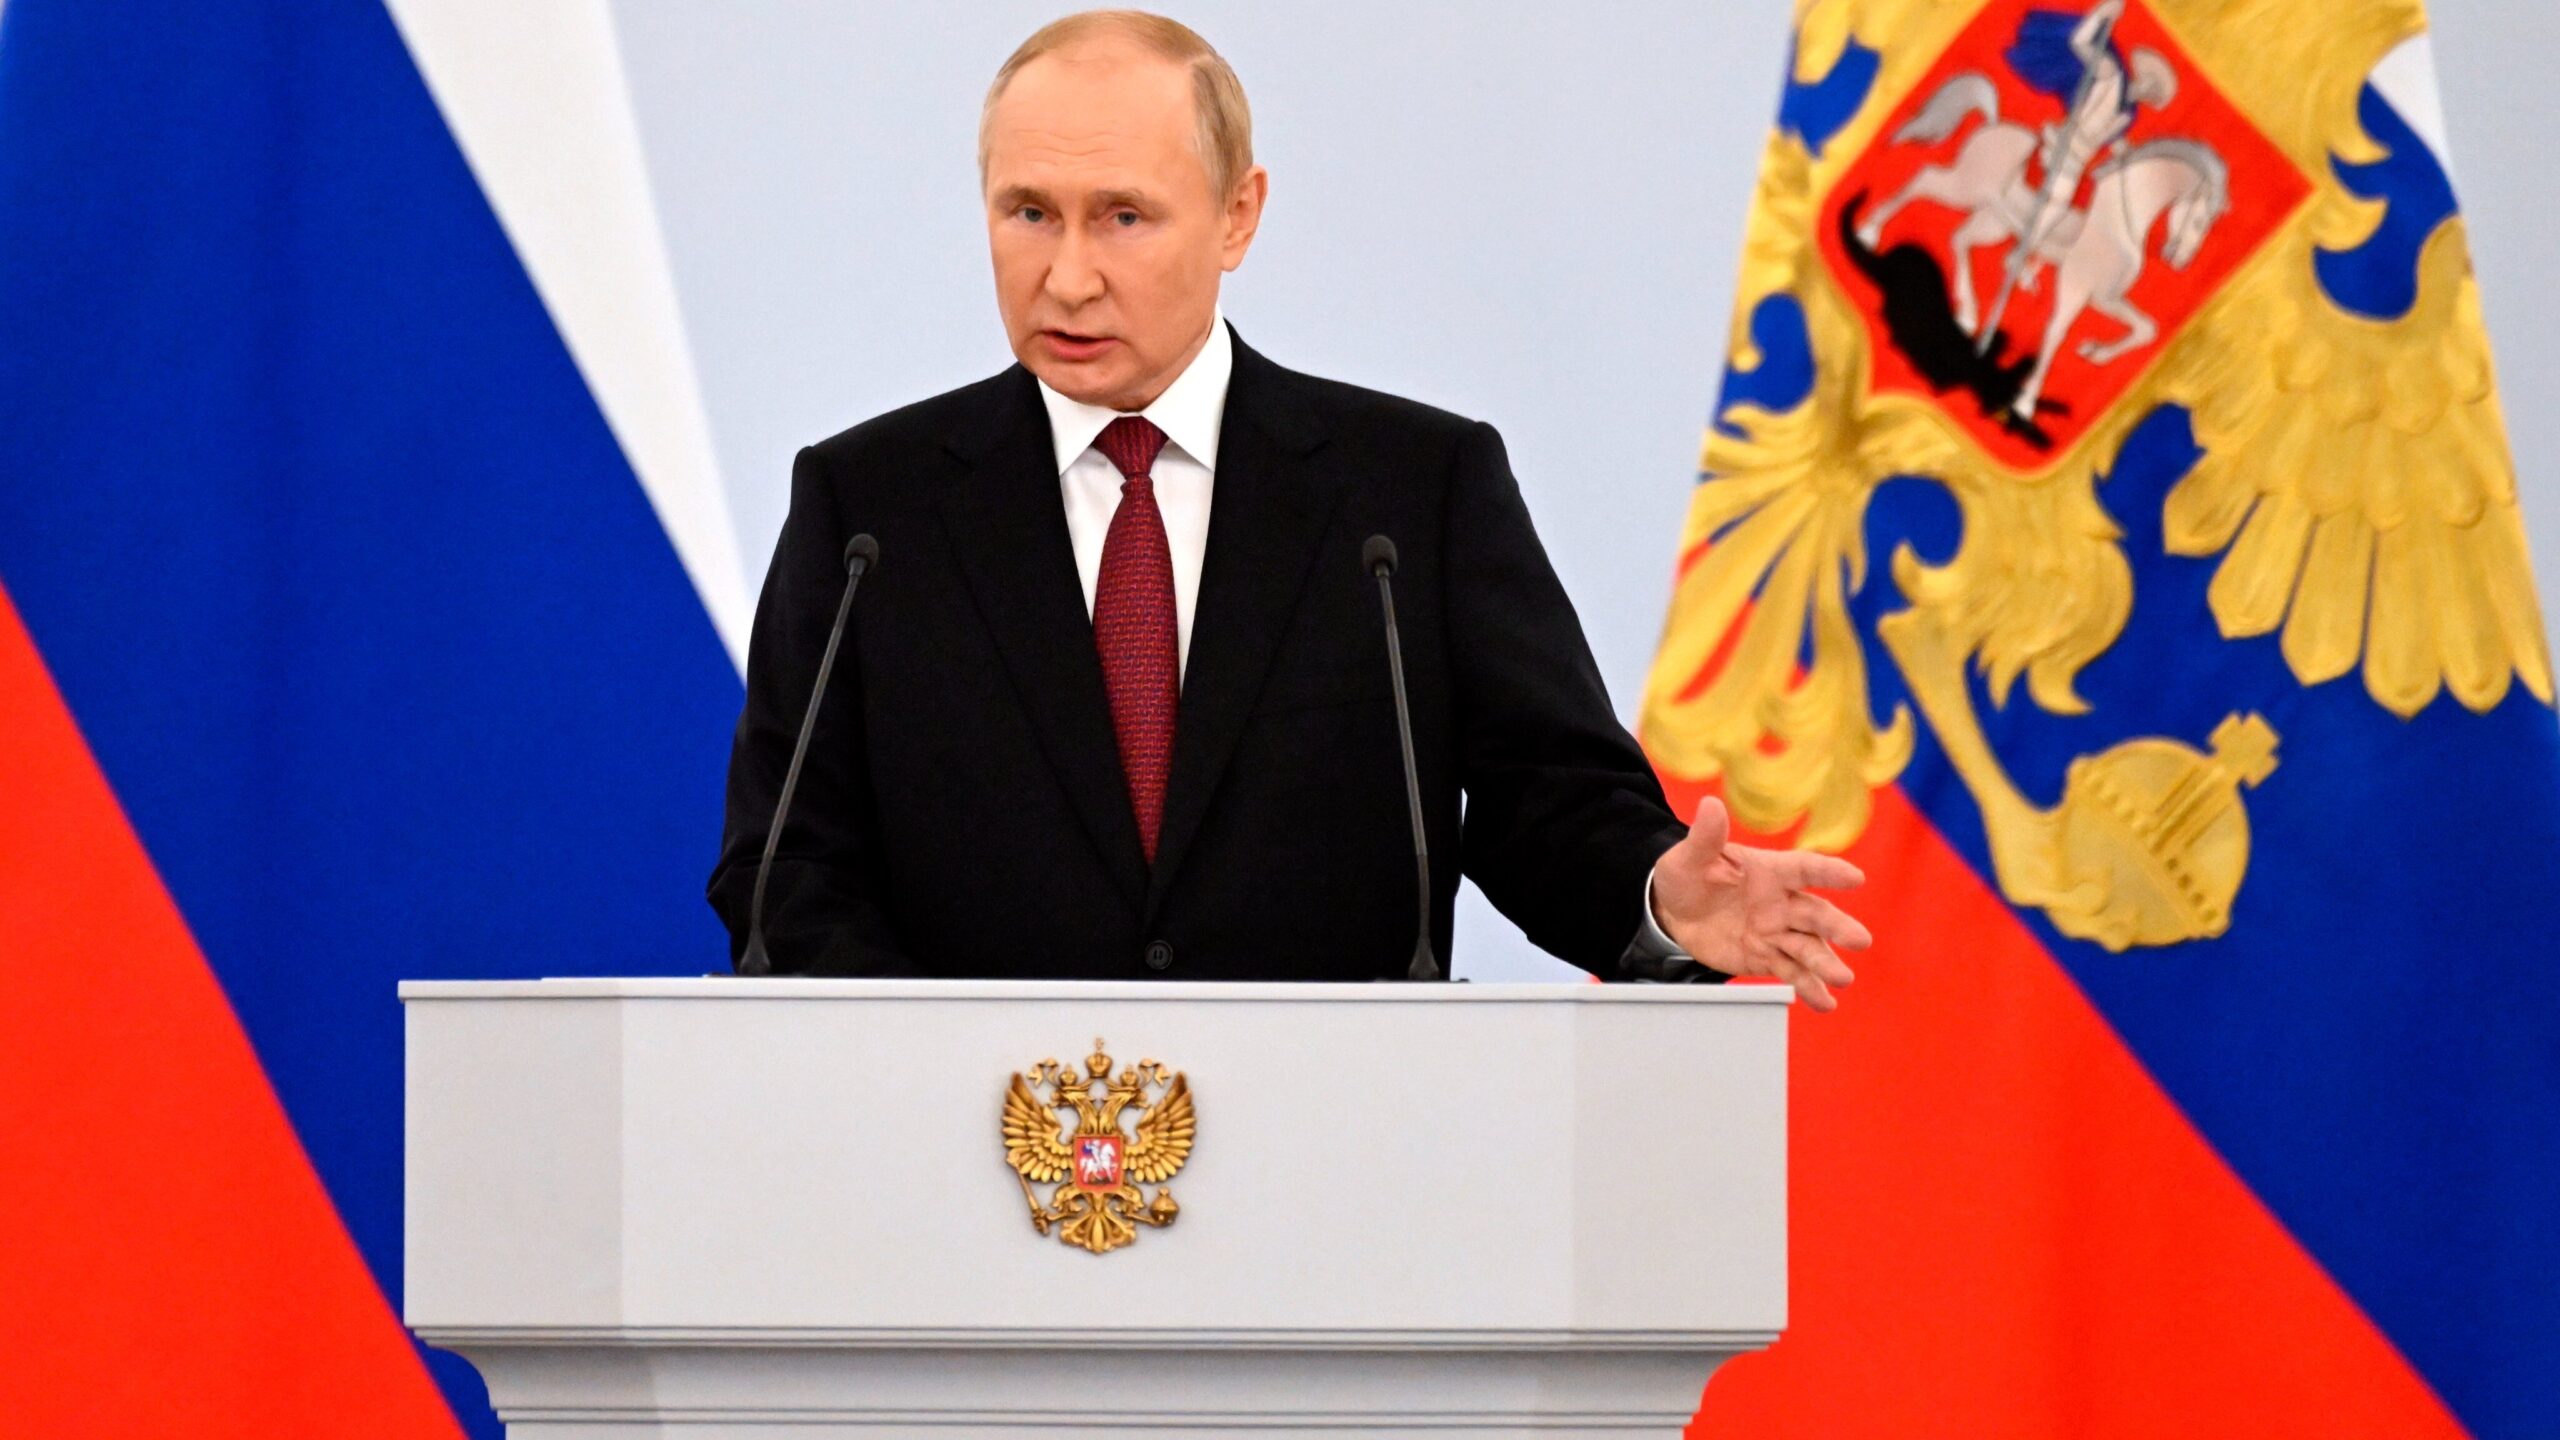 Russia annexes 4 regions of Ukraine, Putin vows to defend land using all means